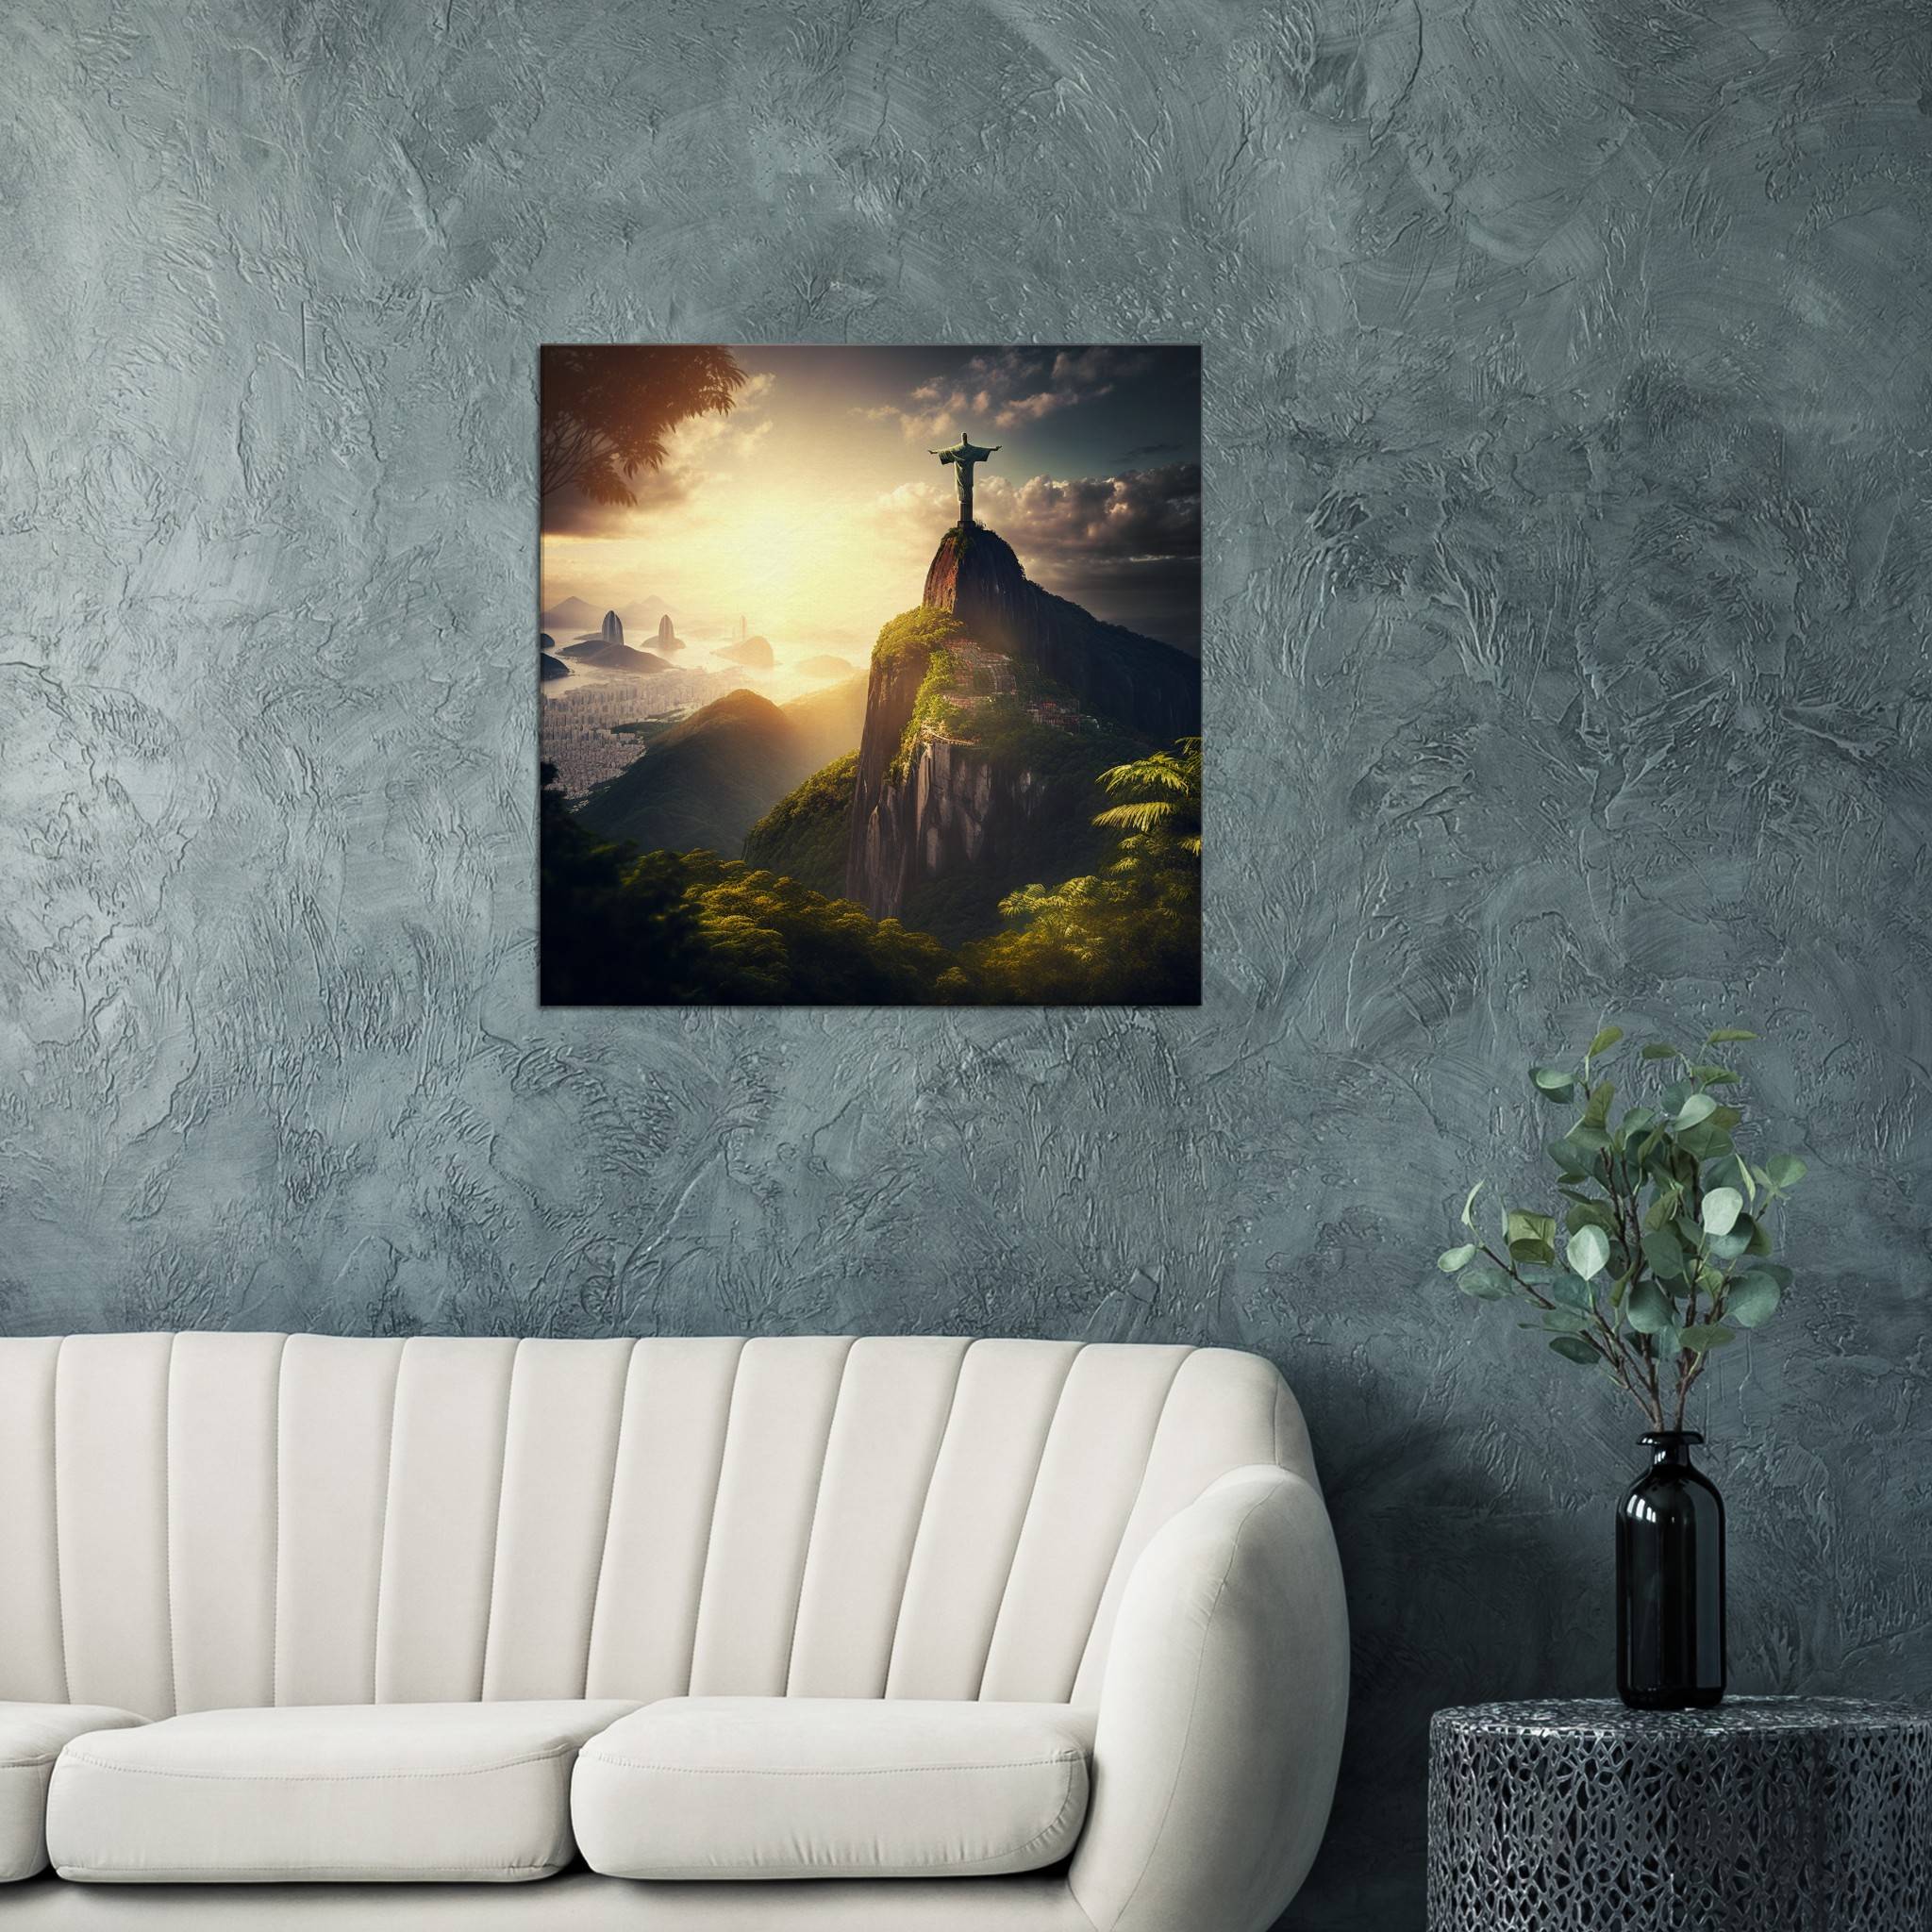 Christ the Redeemer 7 / 60 x 60cm (Canvas Print) Canvas Print Canvas reproduction The Pianist Print On Demand Fabled Gallery https://fabledgallery.art/product/christ-the-redeemer-7-60-x-60cm-canvas-print/